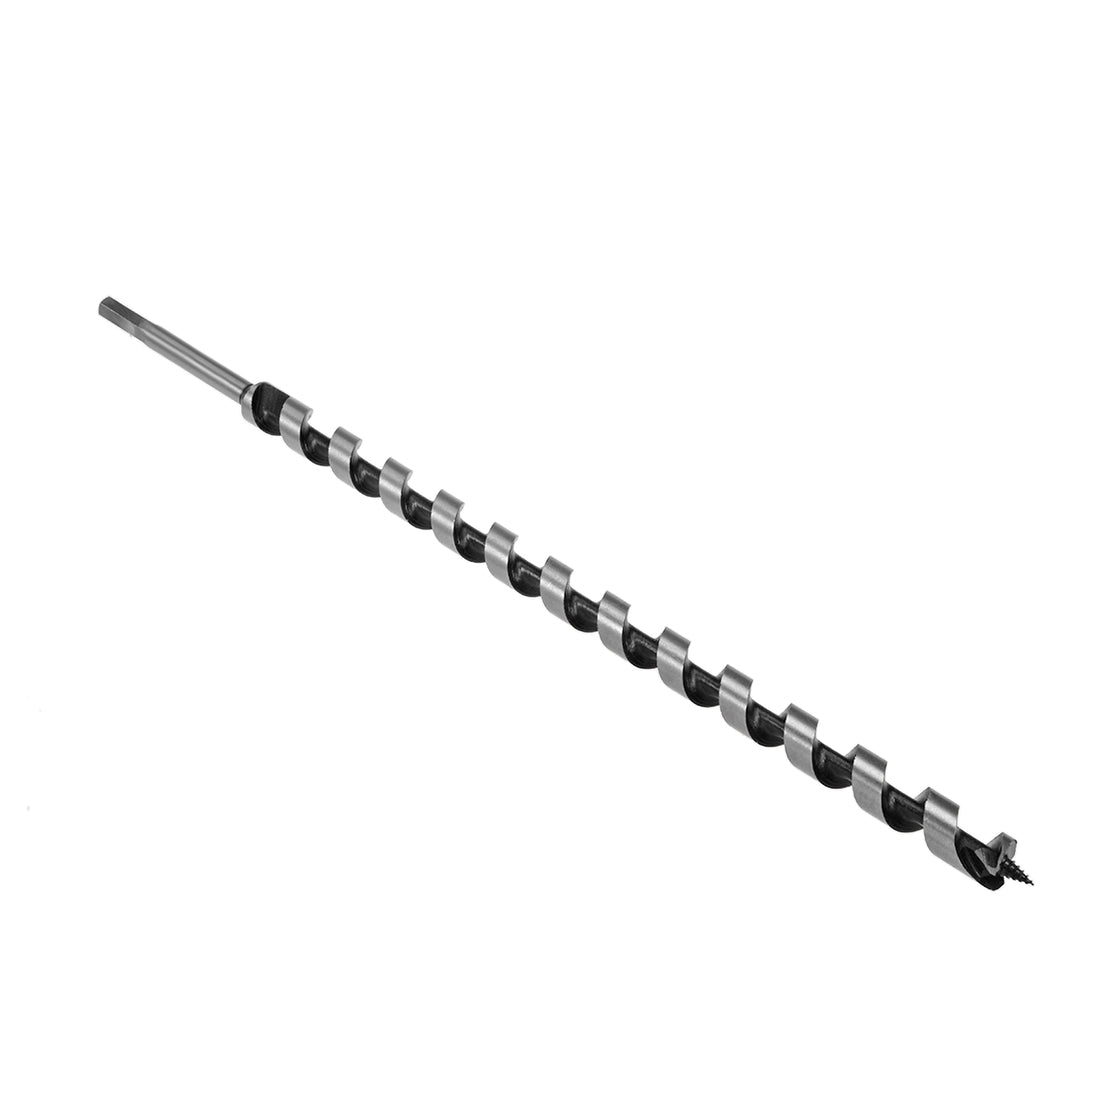 uxcell Uxcell Auger Drill Bit Wood Hex Shank 18mm Cutting Dia. High Carbon Steel for Electric Bench Drill Woodworking Carpentry